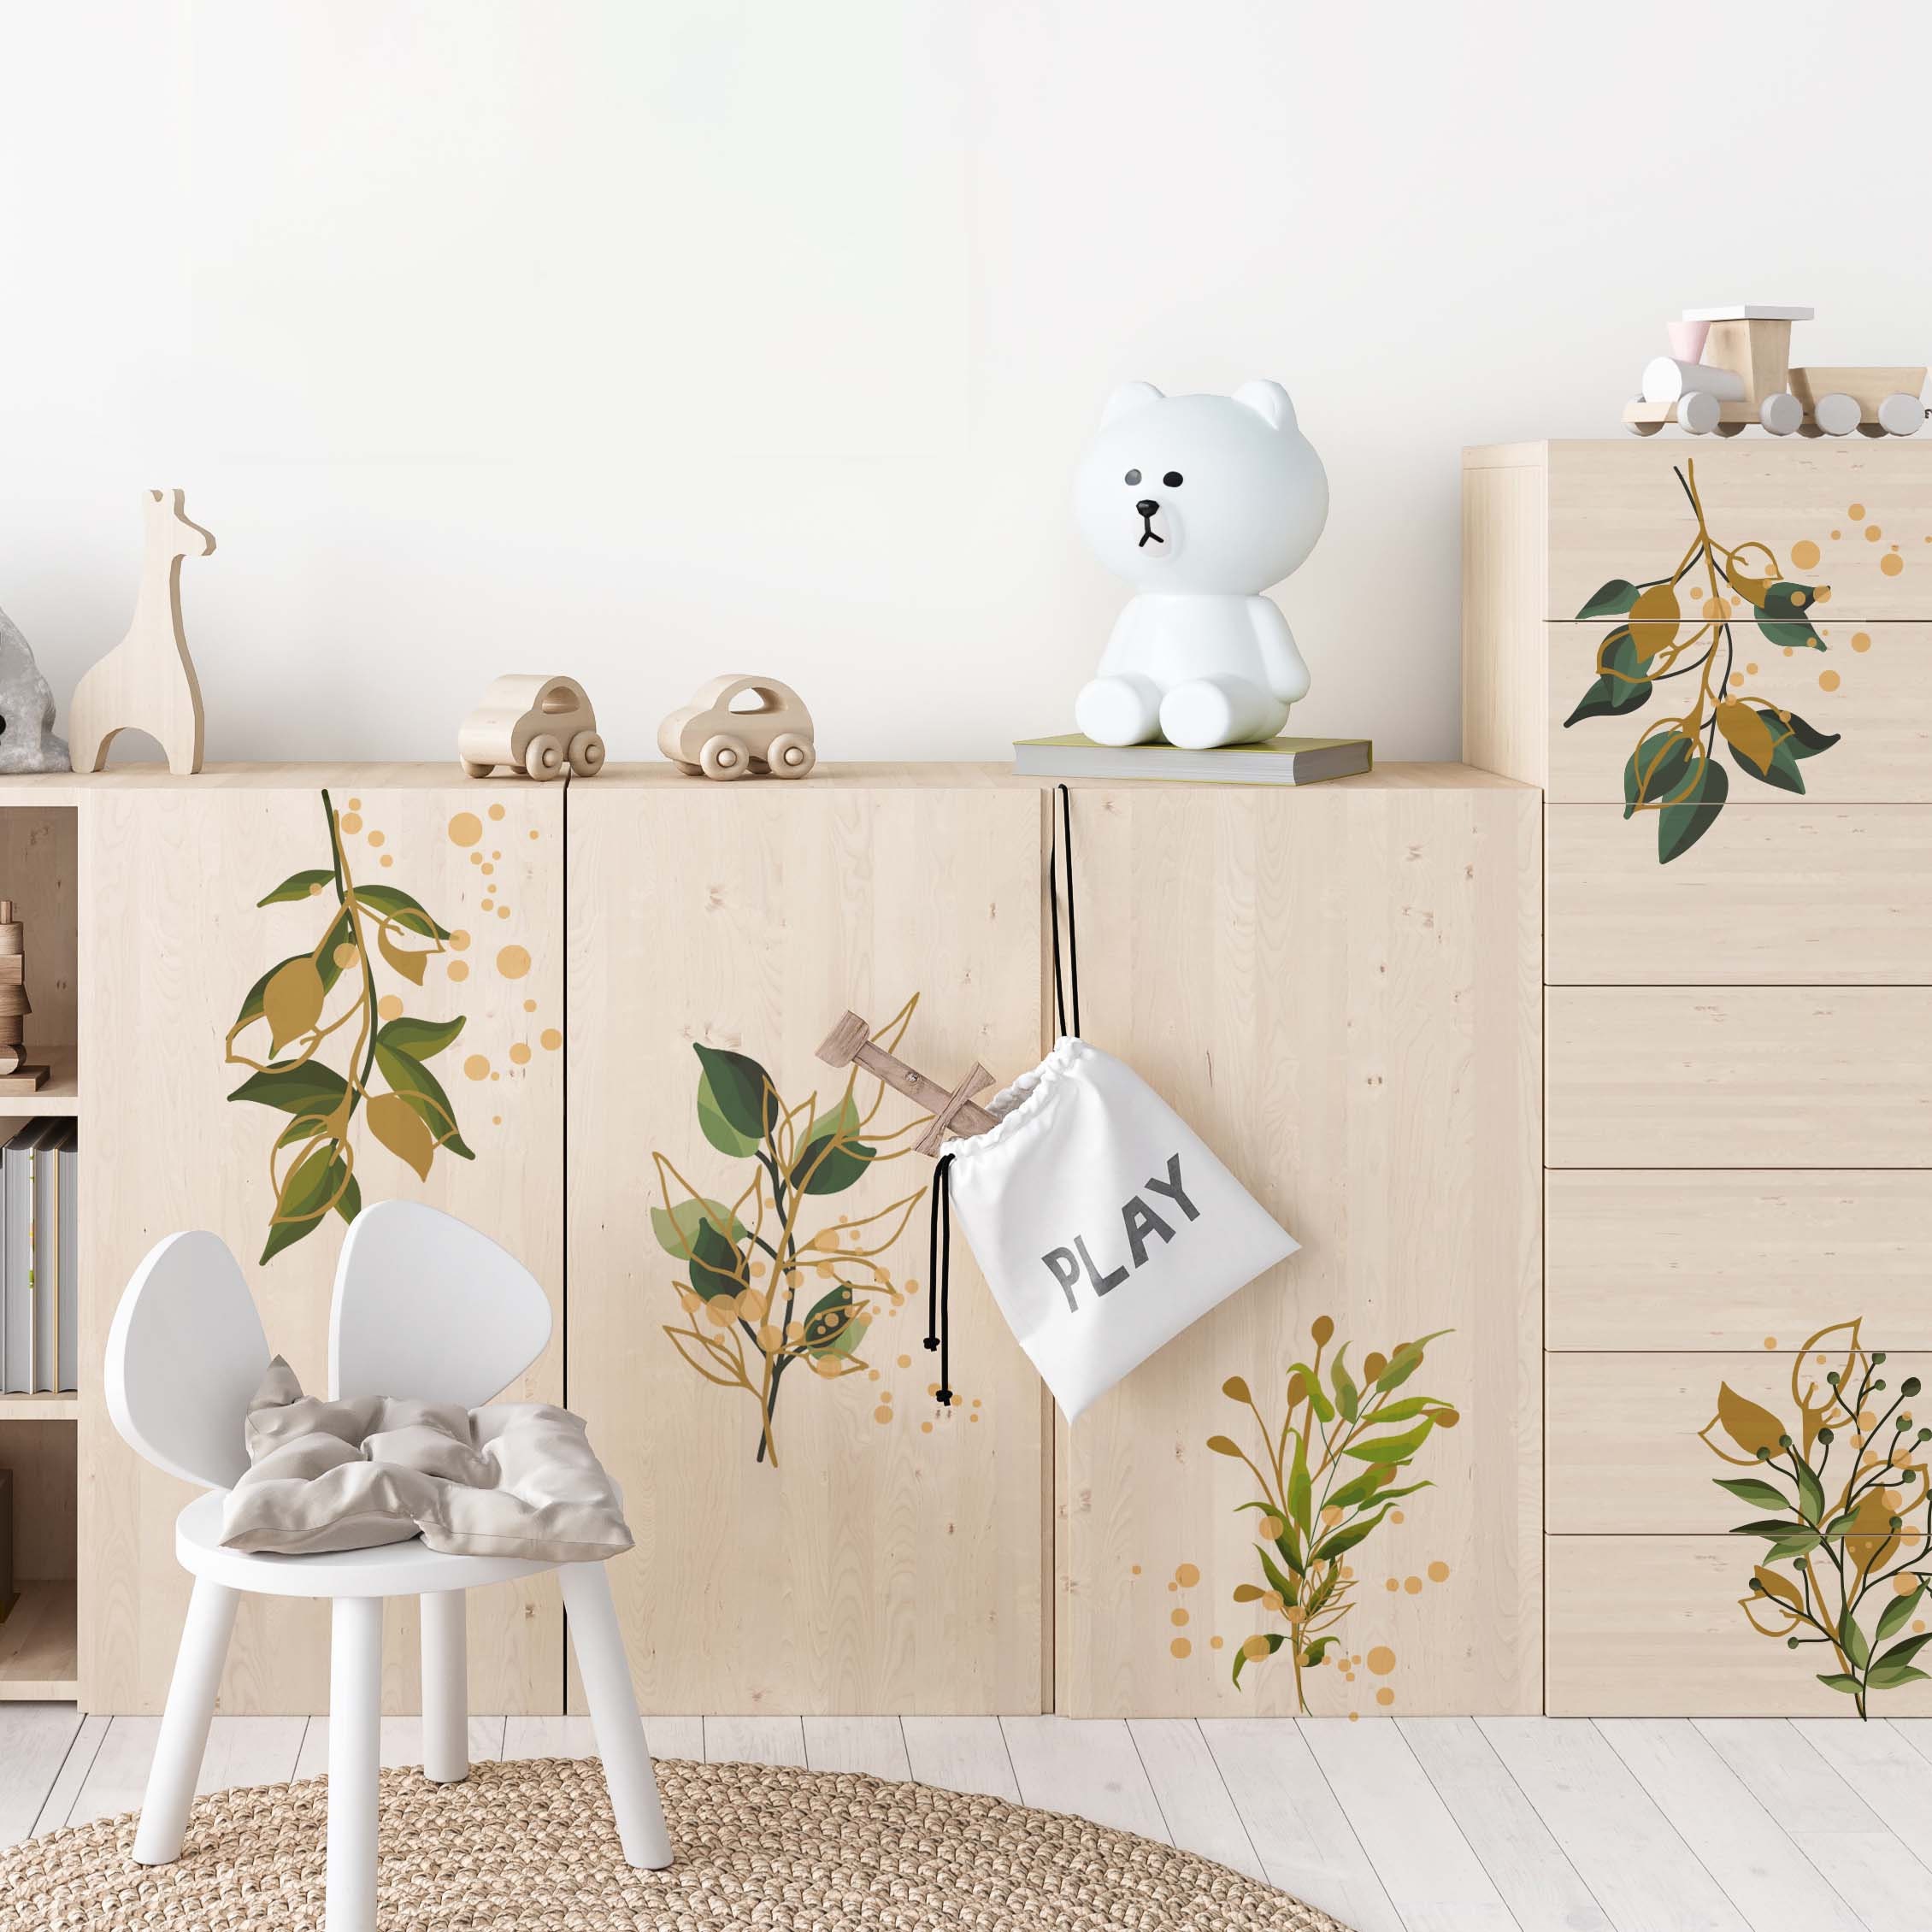 10 Creative Decals to Upcycle IKEA Kid's Furniture - TwinPickle